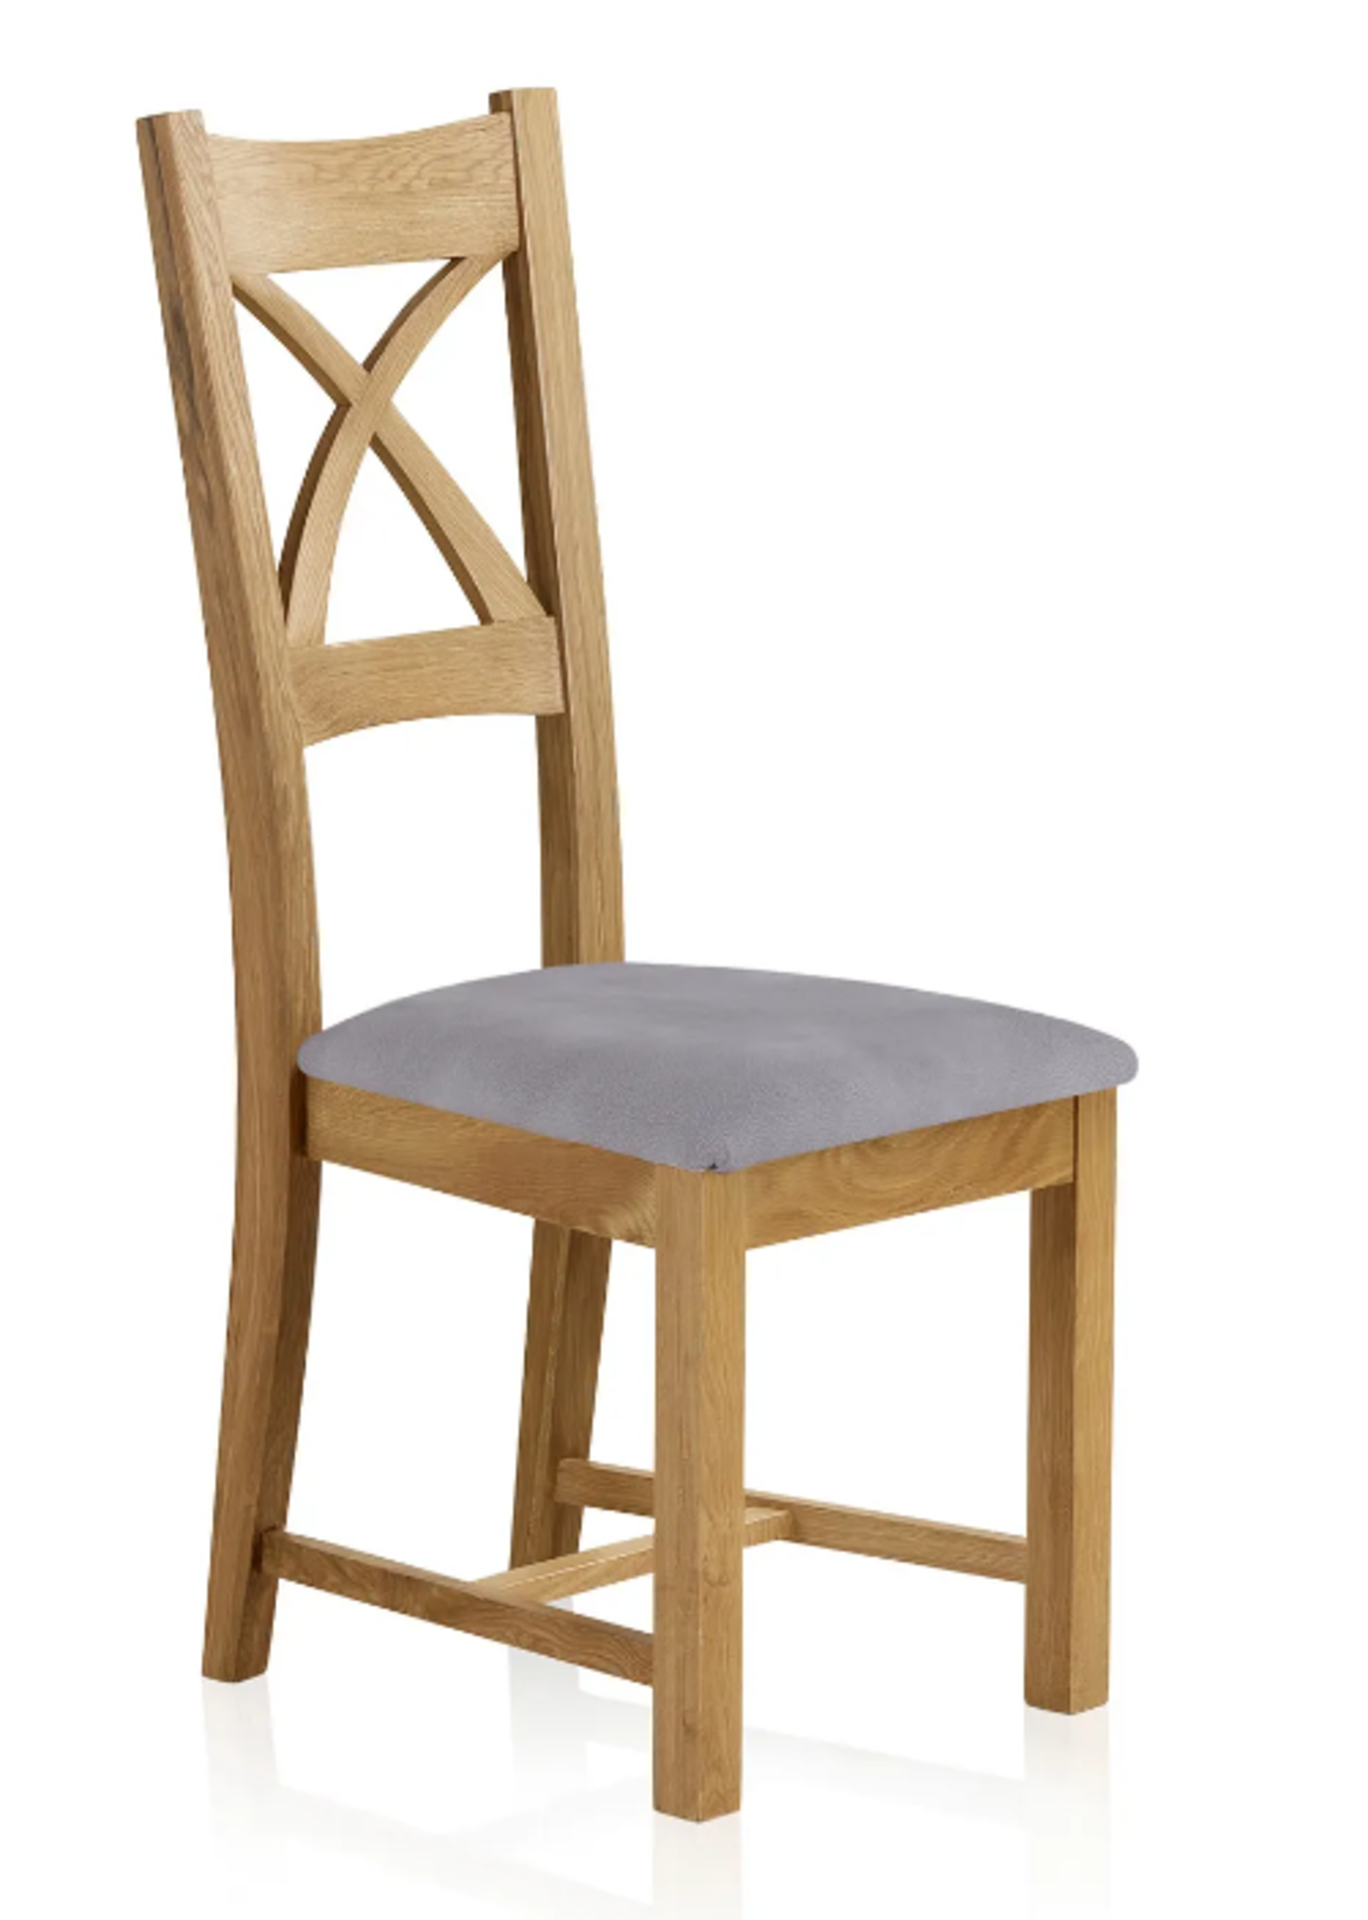 Pair of CROSS NATURAL OAK Dining Chair *no seat pad* RRP £185.00. Complete your dining table with